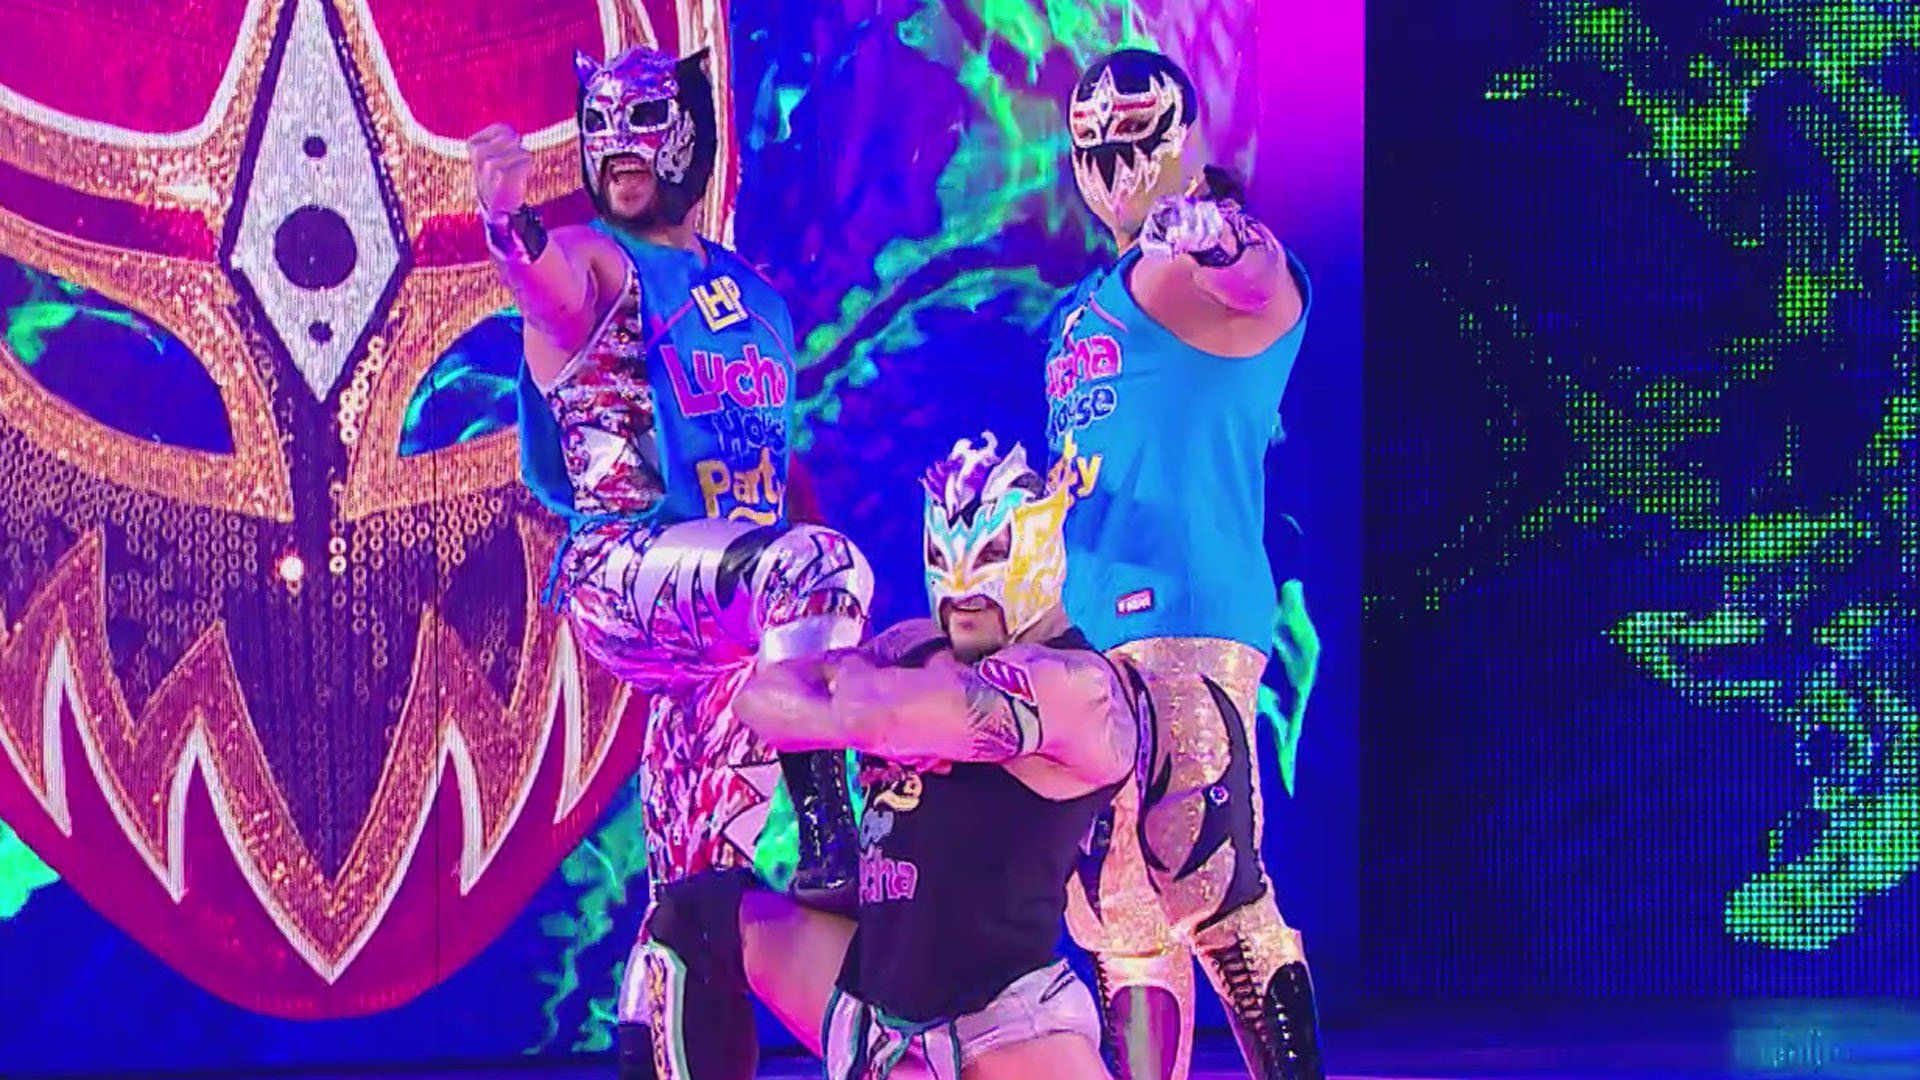 What You Need, The Lucha House Party def. The Revival